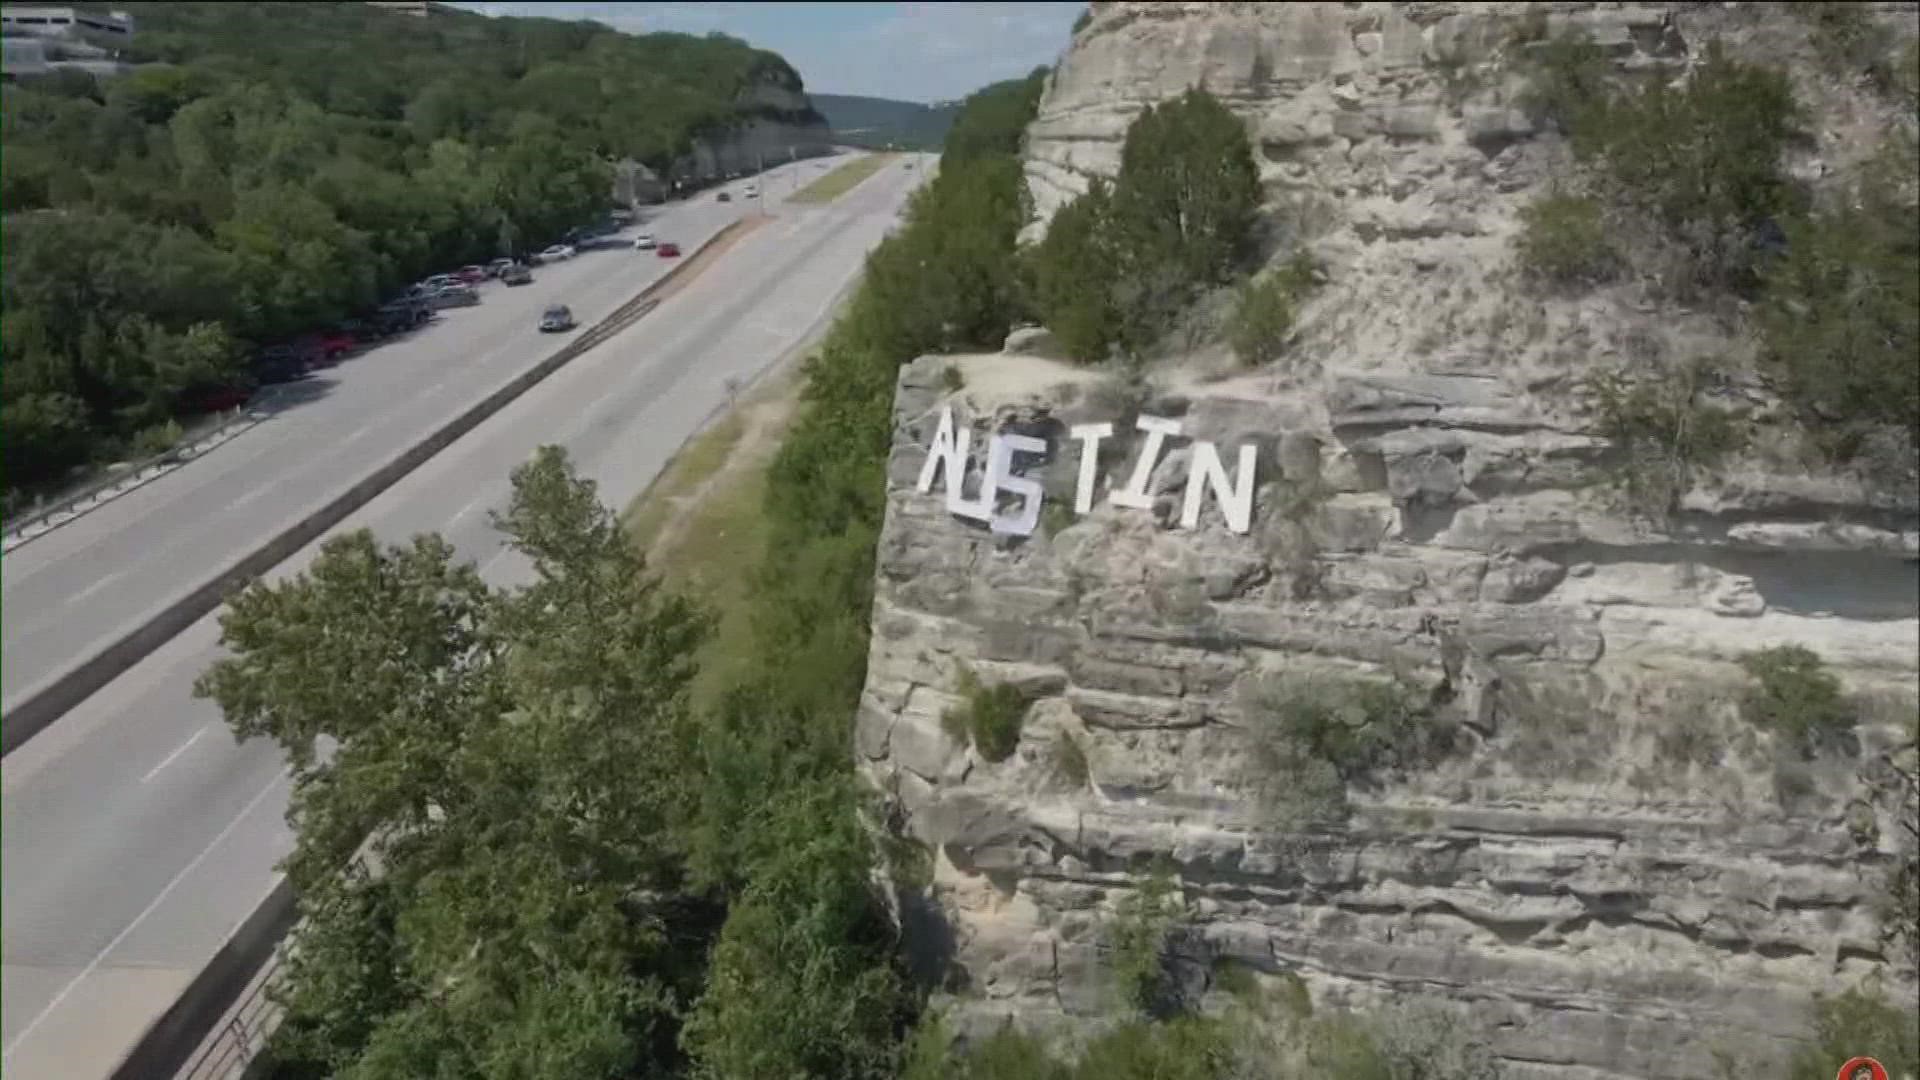 Blake Messick created a sign near the Pennybacker Bridge that spelled out "Austin" in the style of the iconic Hollywood sign.